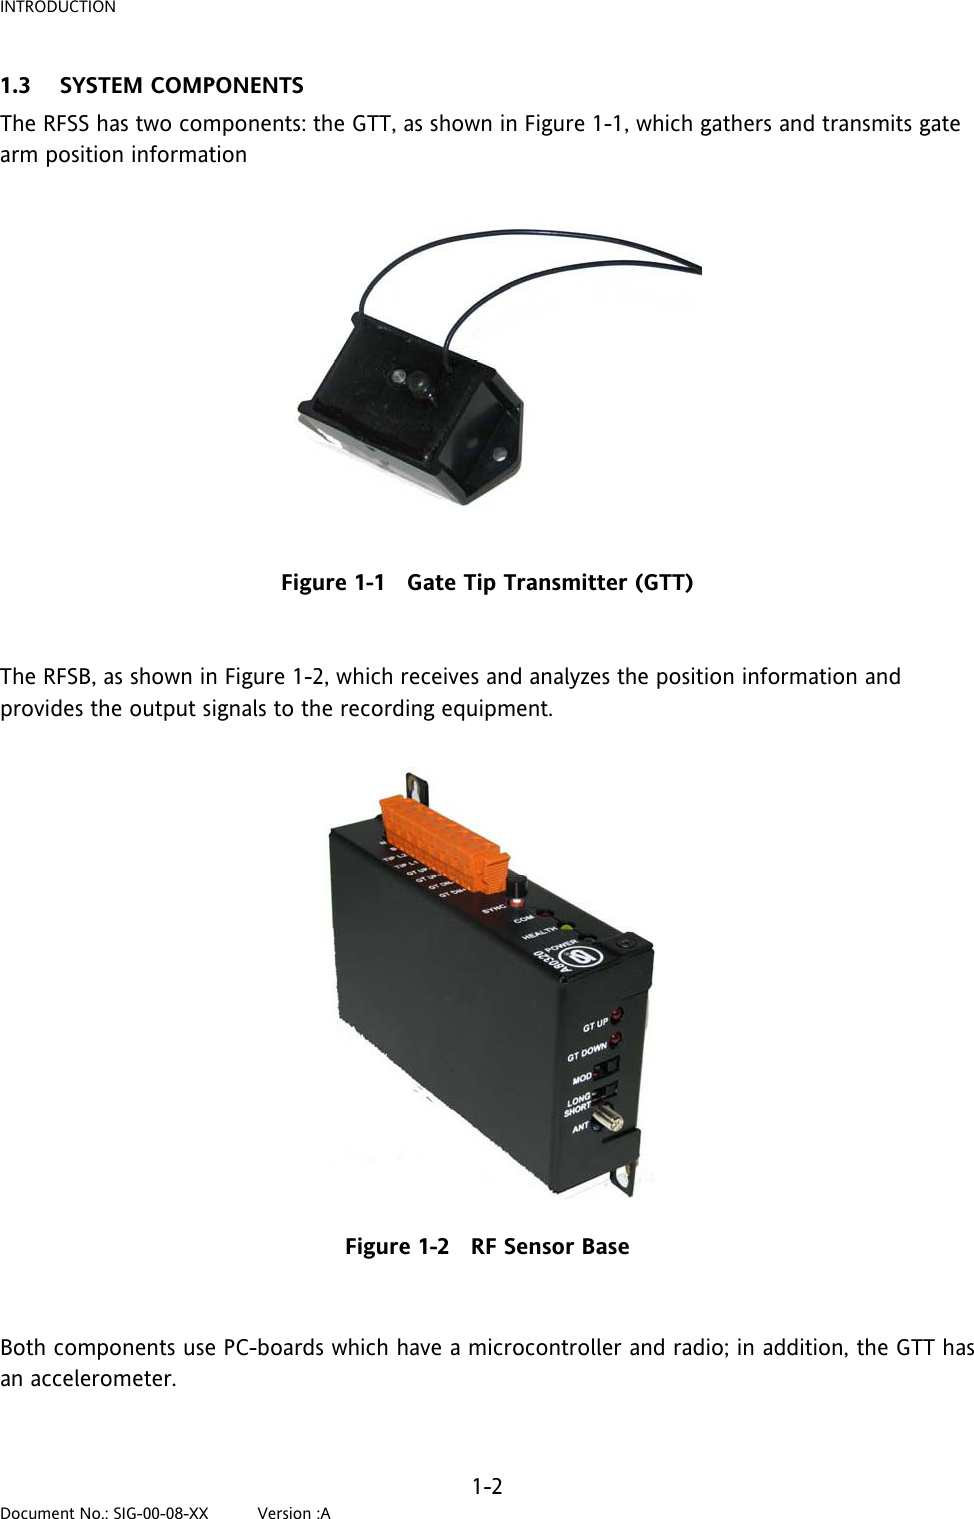 INTRODUCTION 1.3 SYSTEM COMPONENTS The RFSS has two components: the GTT, as shown in Figure 1-1, which gathers and transmits gate arm position information    Figure 1-1   Gate Tip Transmitter (GTT)   The RFSB, as shown in Figure 1-2, which receives and analyzes the position information and provides the output signals to the recording equipment.           Figure 1-2   RF Sensor Base  Both components use PC-boards which have a microcontroller and radio; in addition, the GTT has an accelerometer.   1-2 Document No.: SIG-00-08-XX          Version :A 